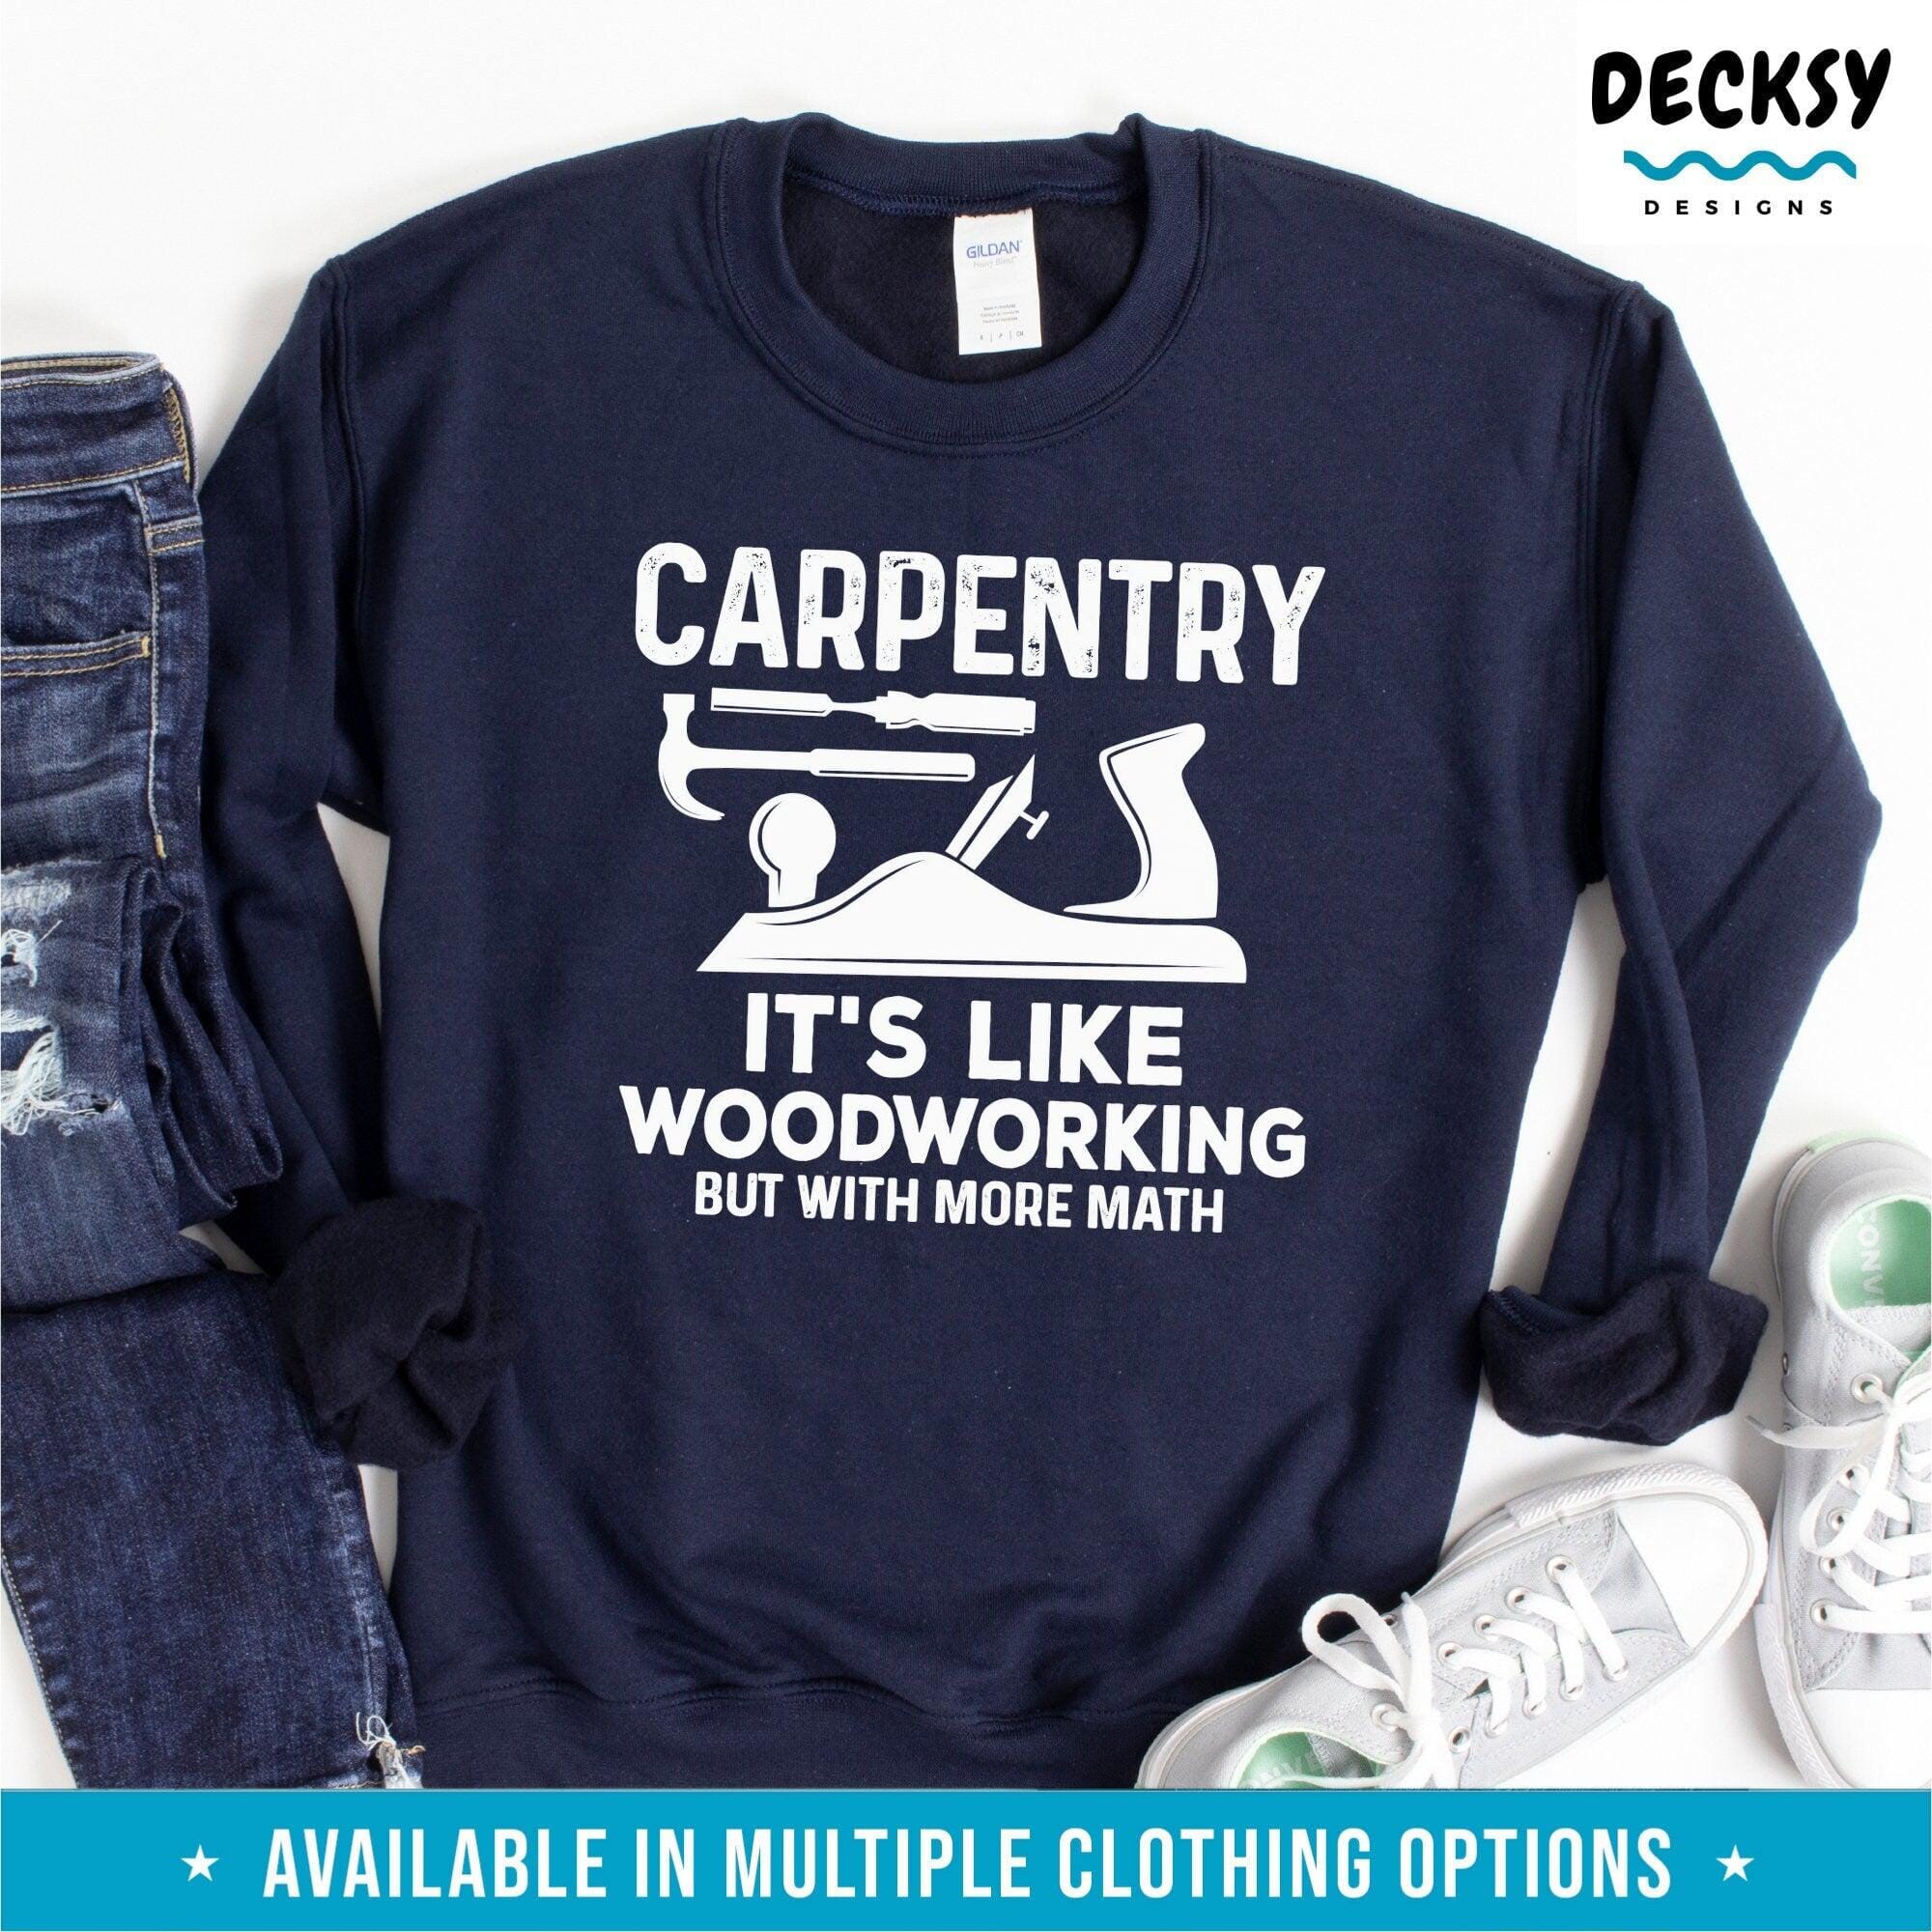 Carpenter Shirt, Woodworker Gift-Clothing:Gender-Neutral Adult Clothing:Tops & Tees:T-shirts:Graphic Tees-DecksyDesigns